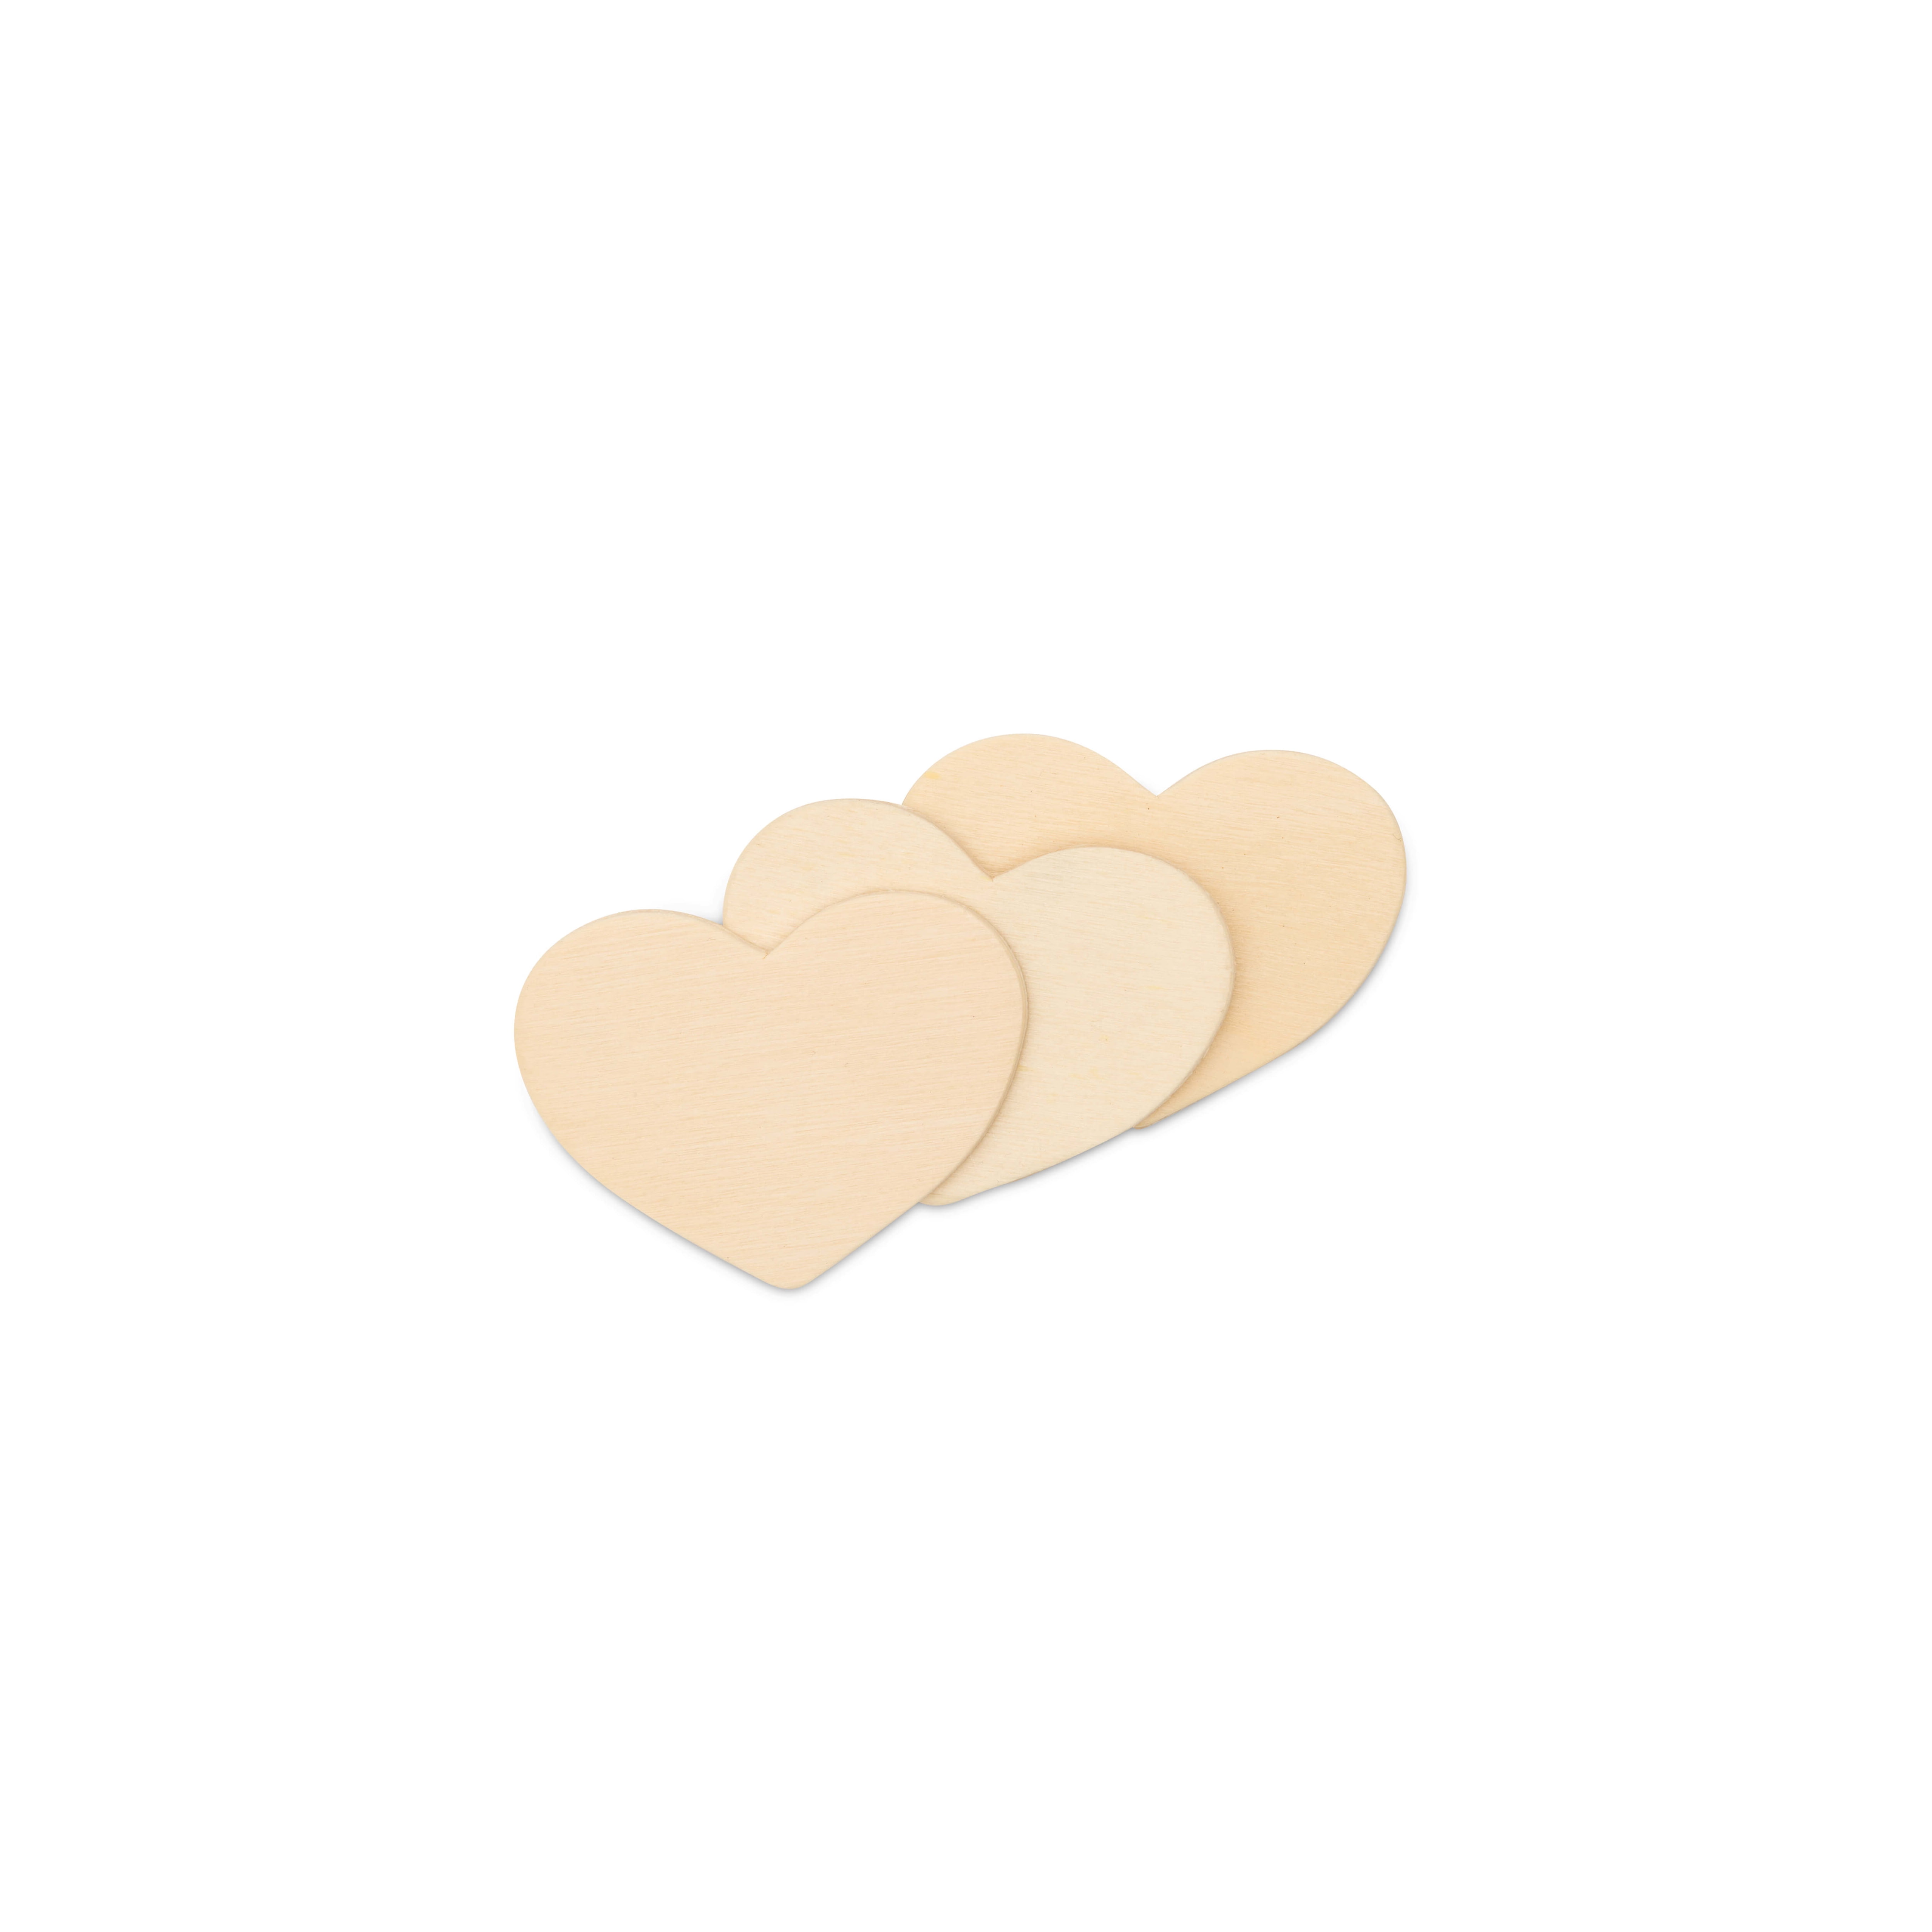 HORSESHOES & cut out small hearts PLAIN BLANK WOODEN SHAPE UNPAINTED WEDDING TAG 